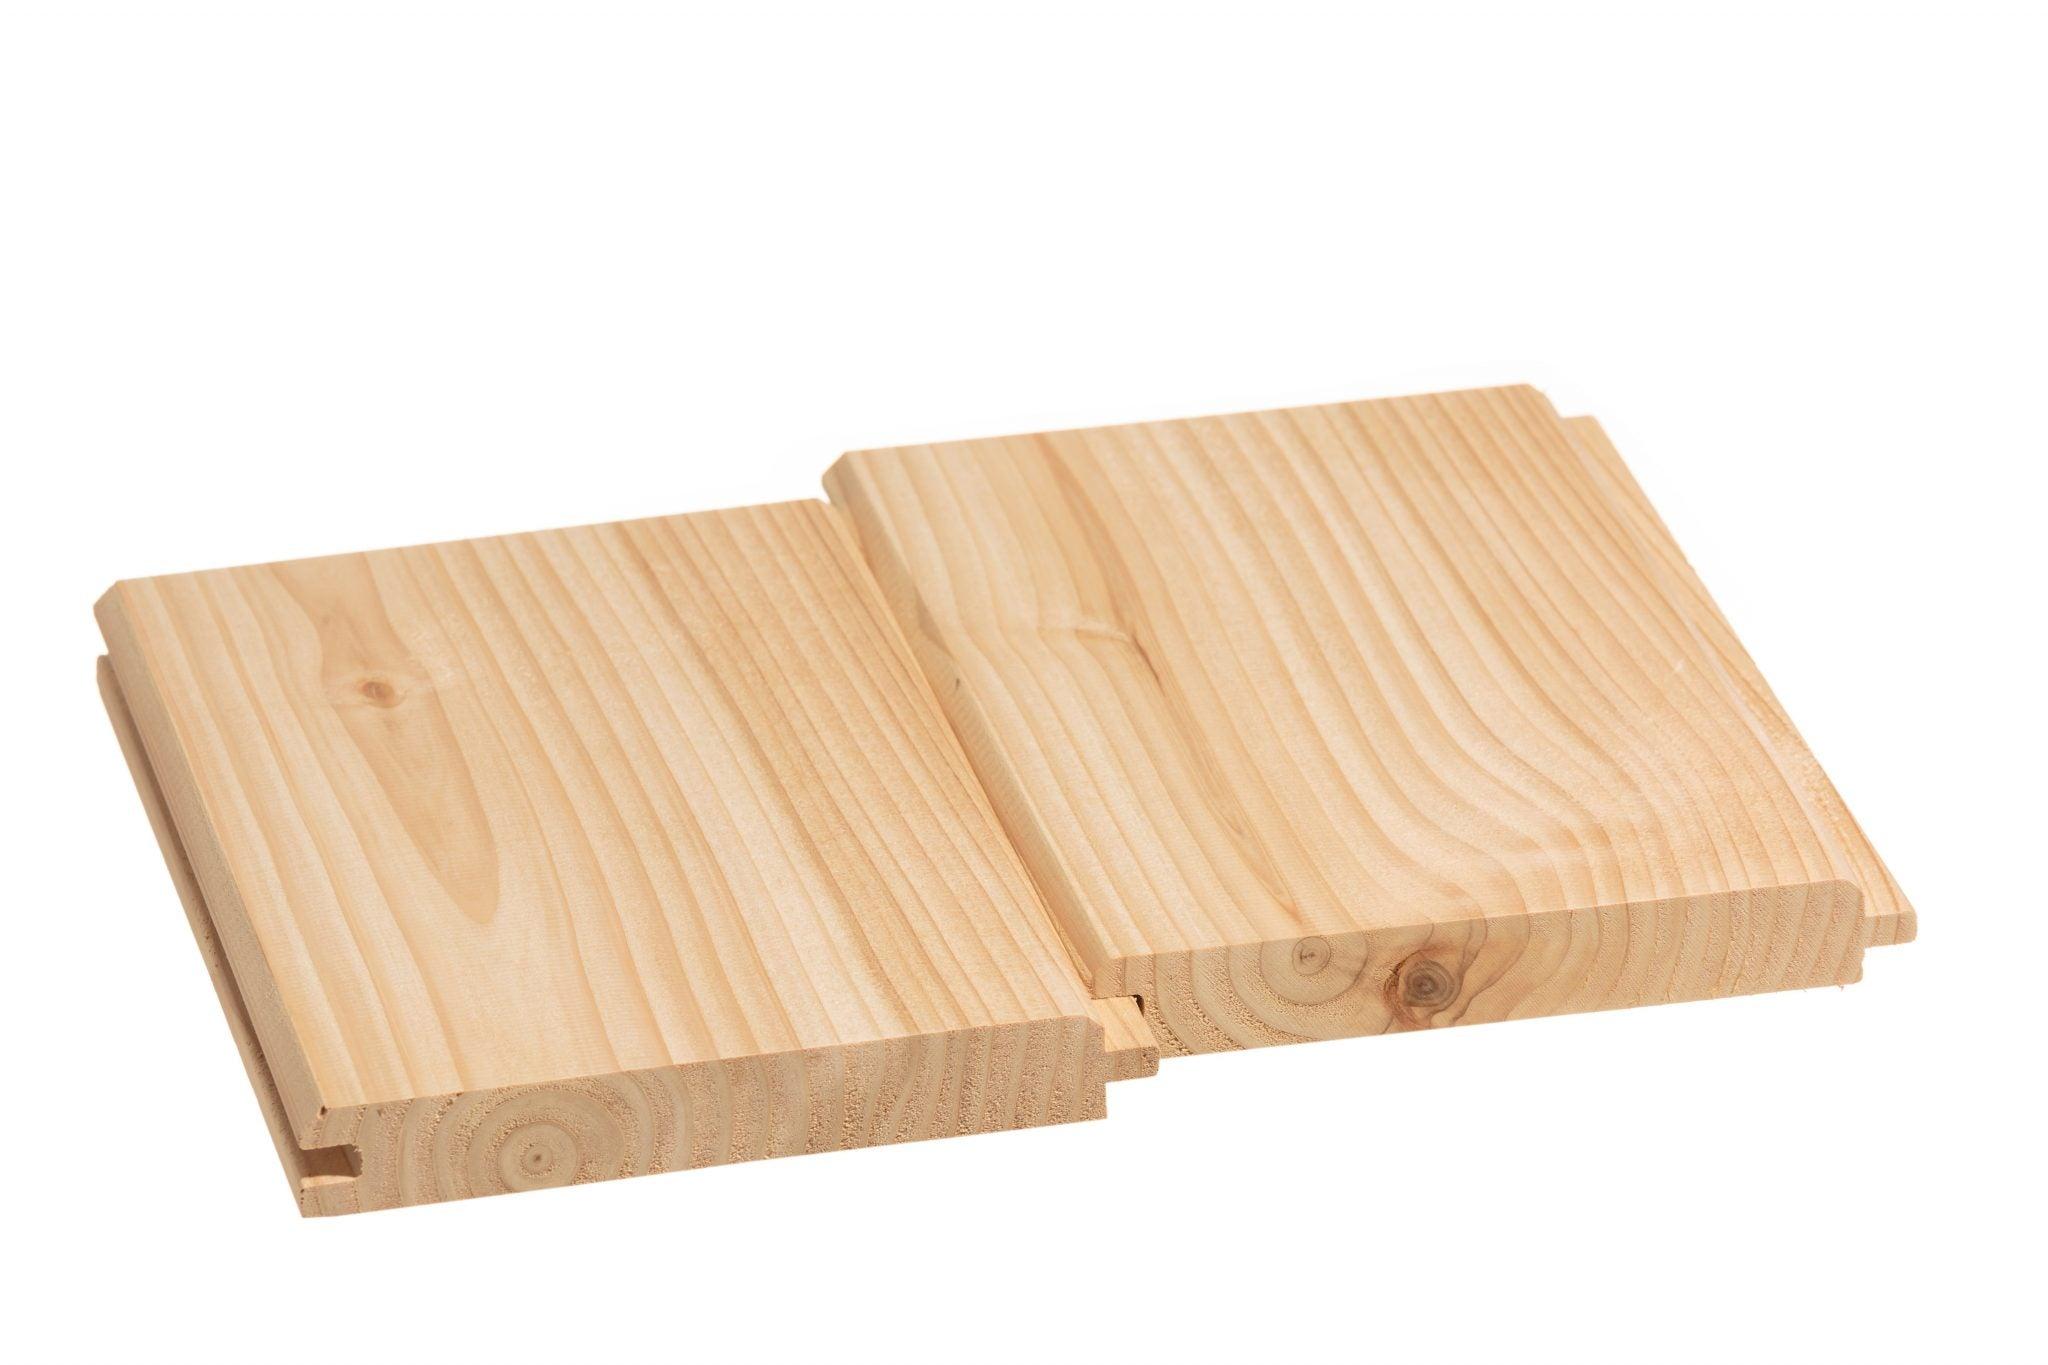 Treated Pine Softwood Tongue and Groove V Shape Board - MSS Timber